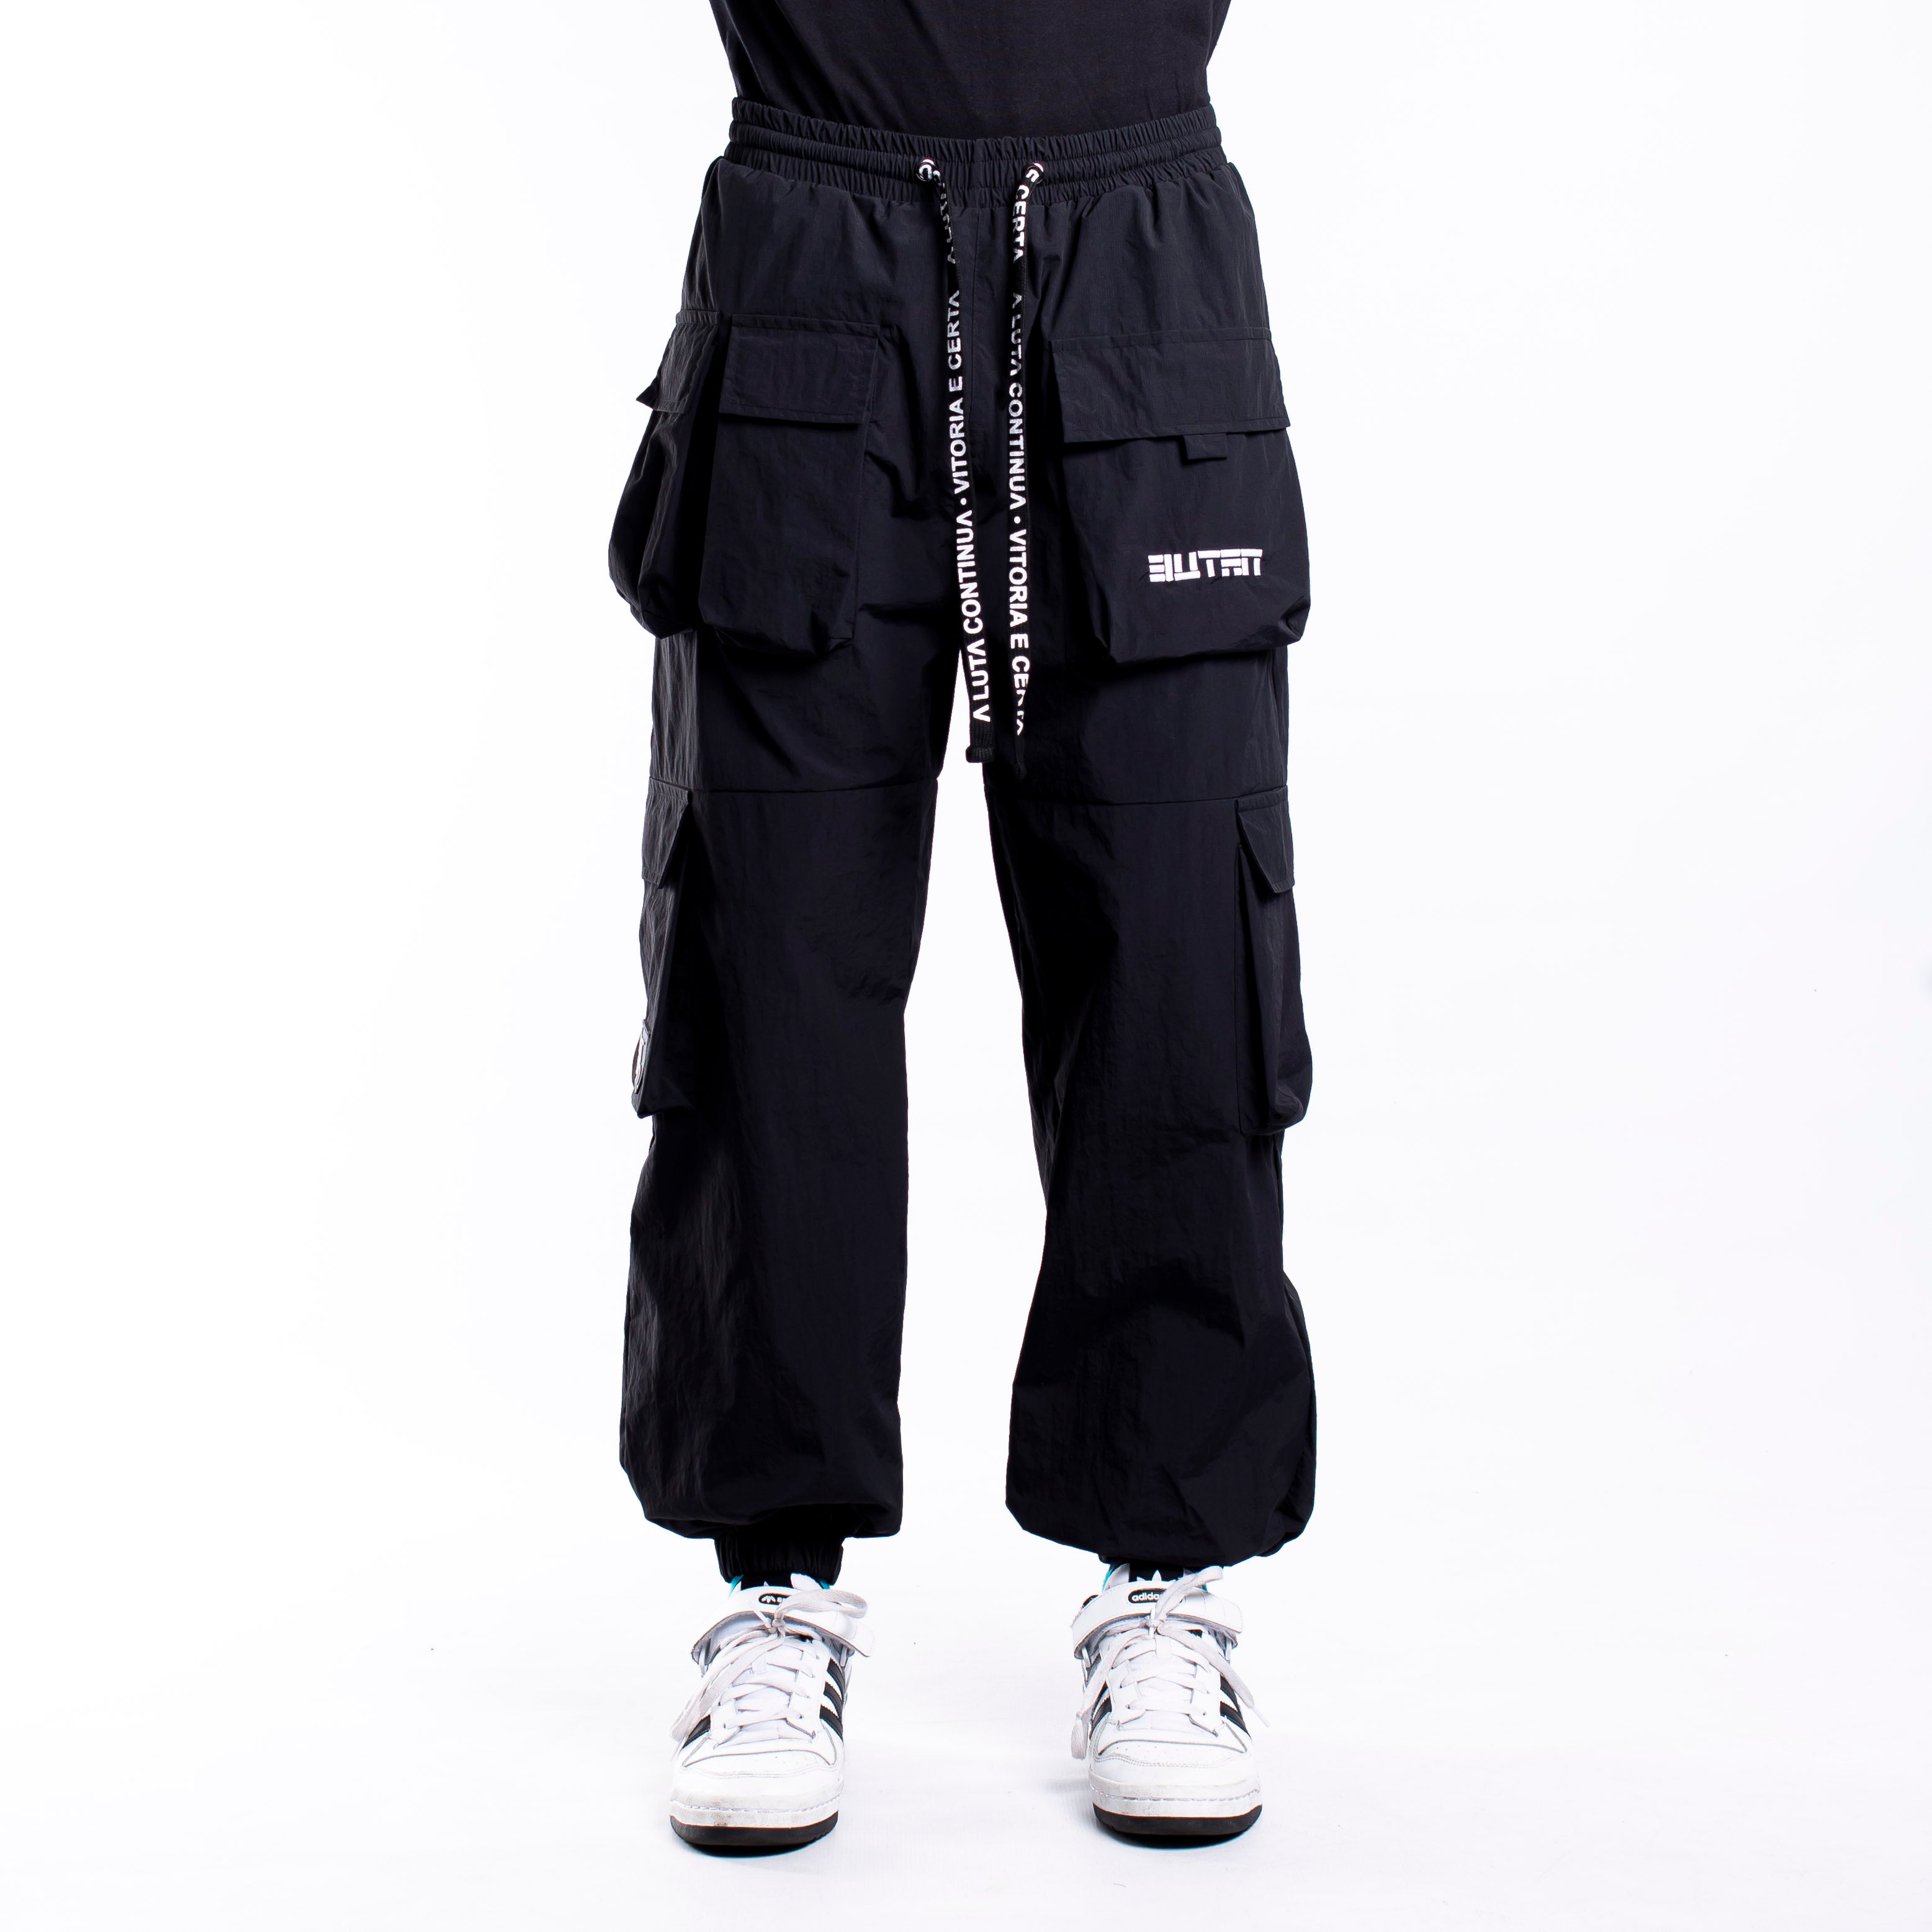 Luxury streetwear pants for the cultue icons.